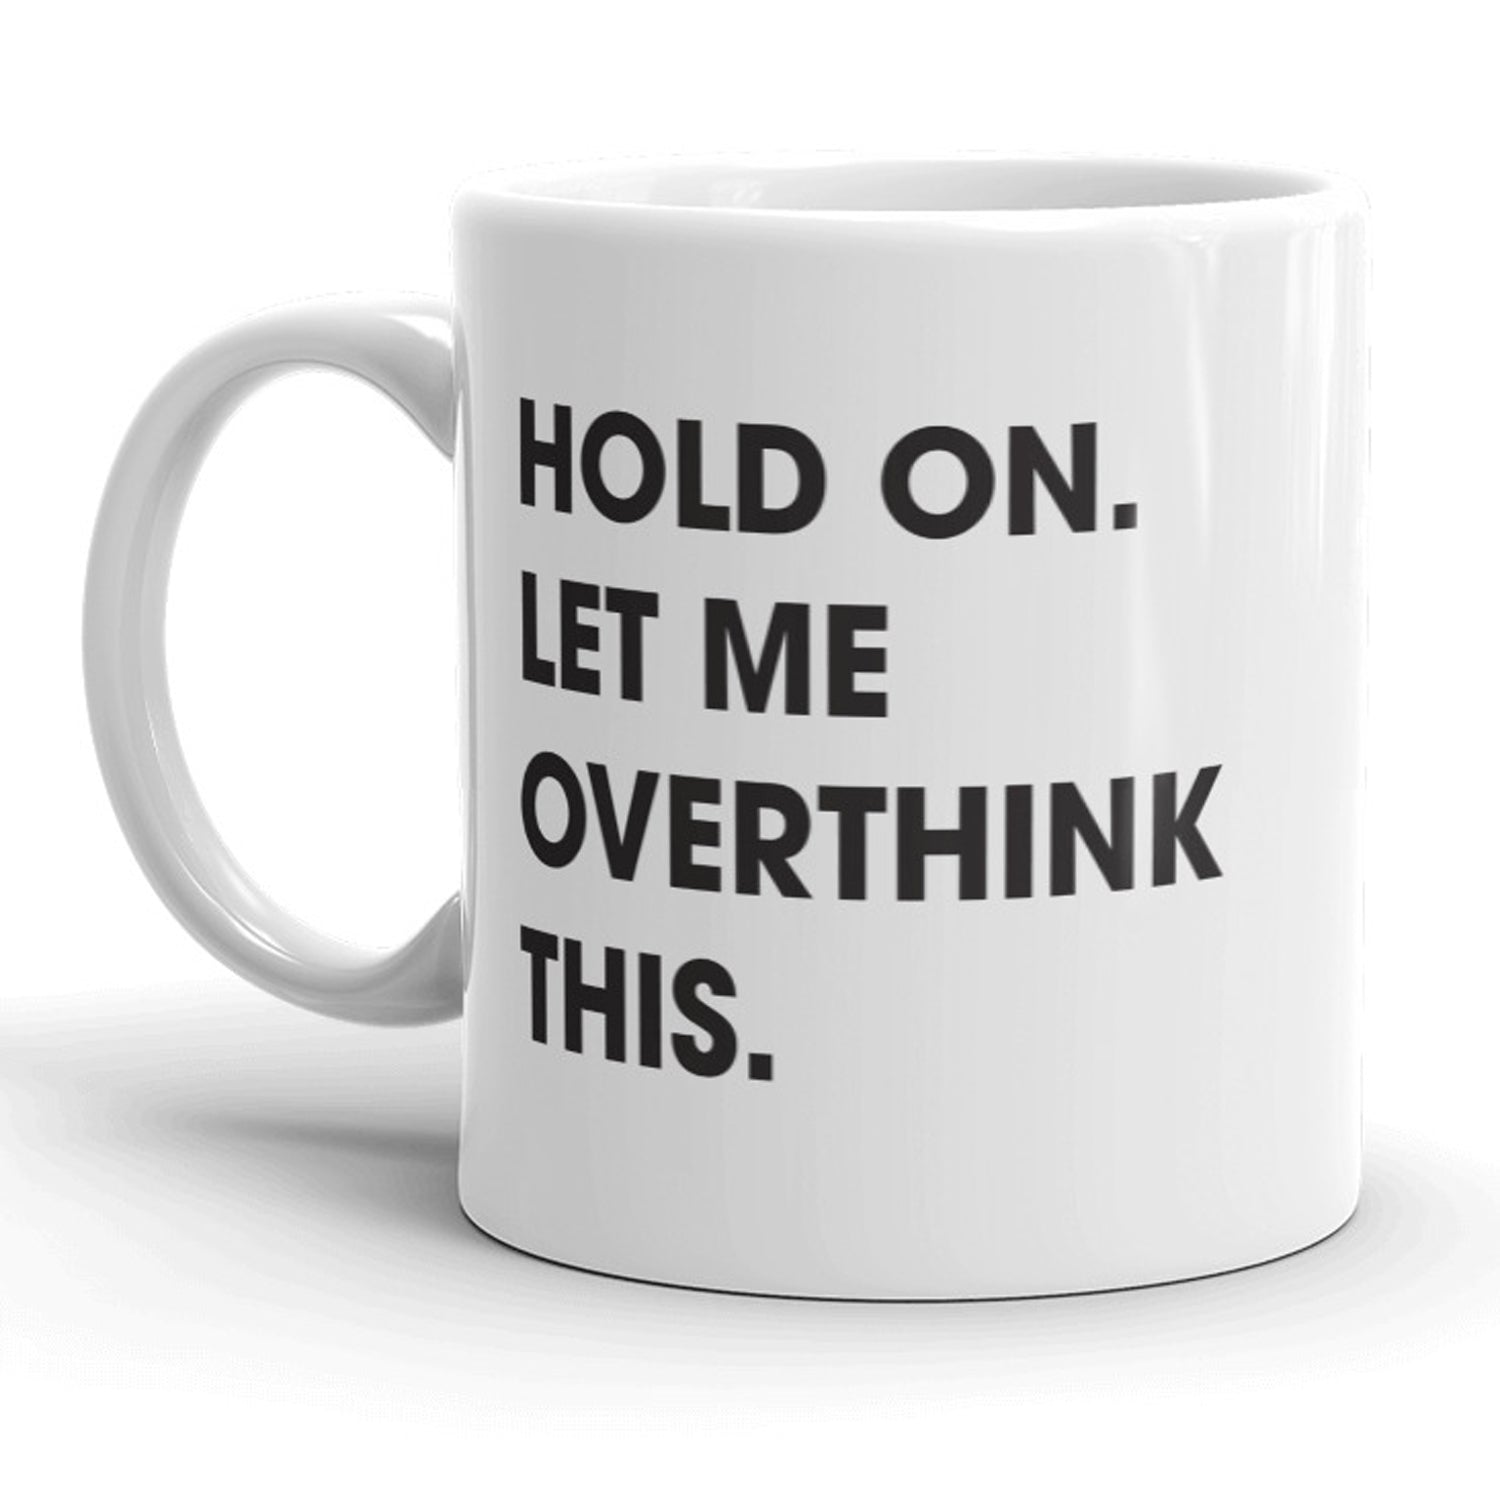 Funny White Hold On Let Me Overthink This Coffee Mug Nerdy Sarcastic Tee